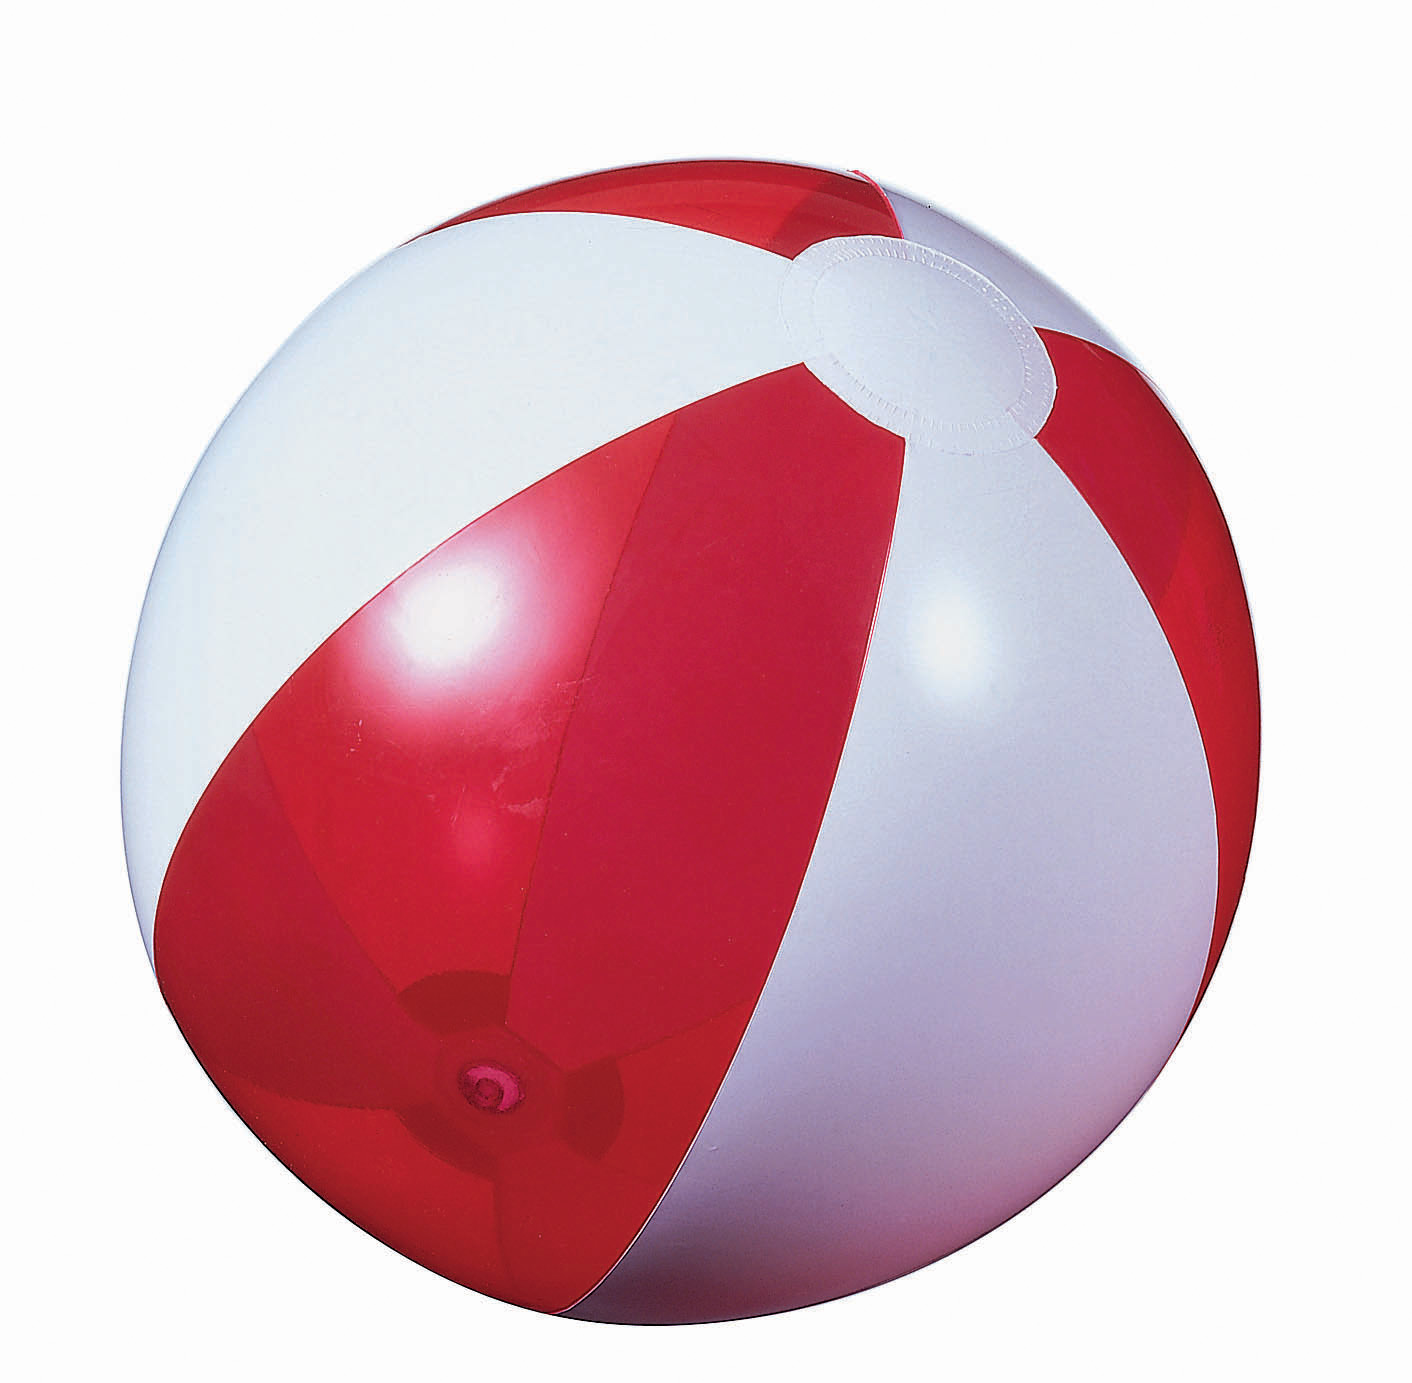 32 Beach Ball Images Free Cliparts That You Can Download To You